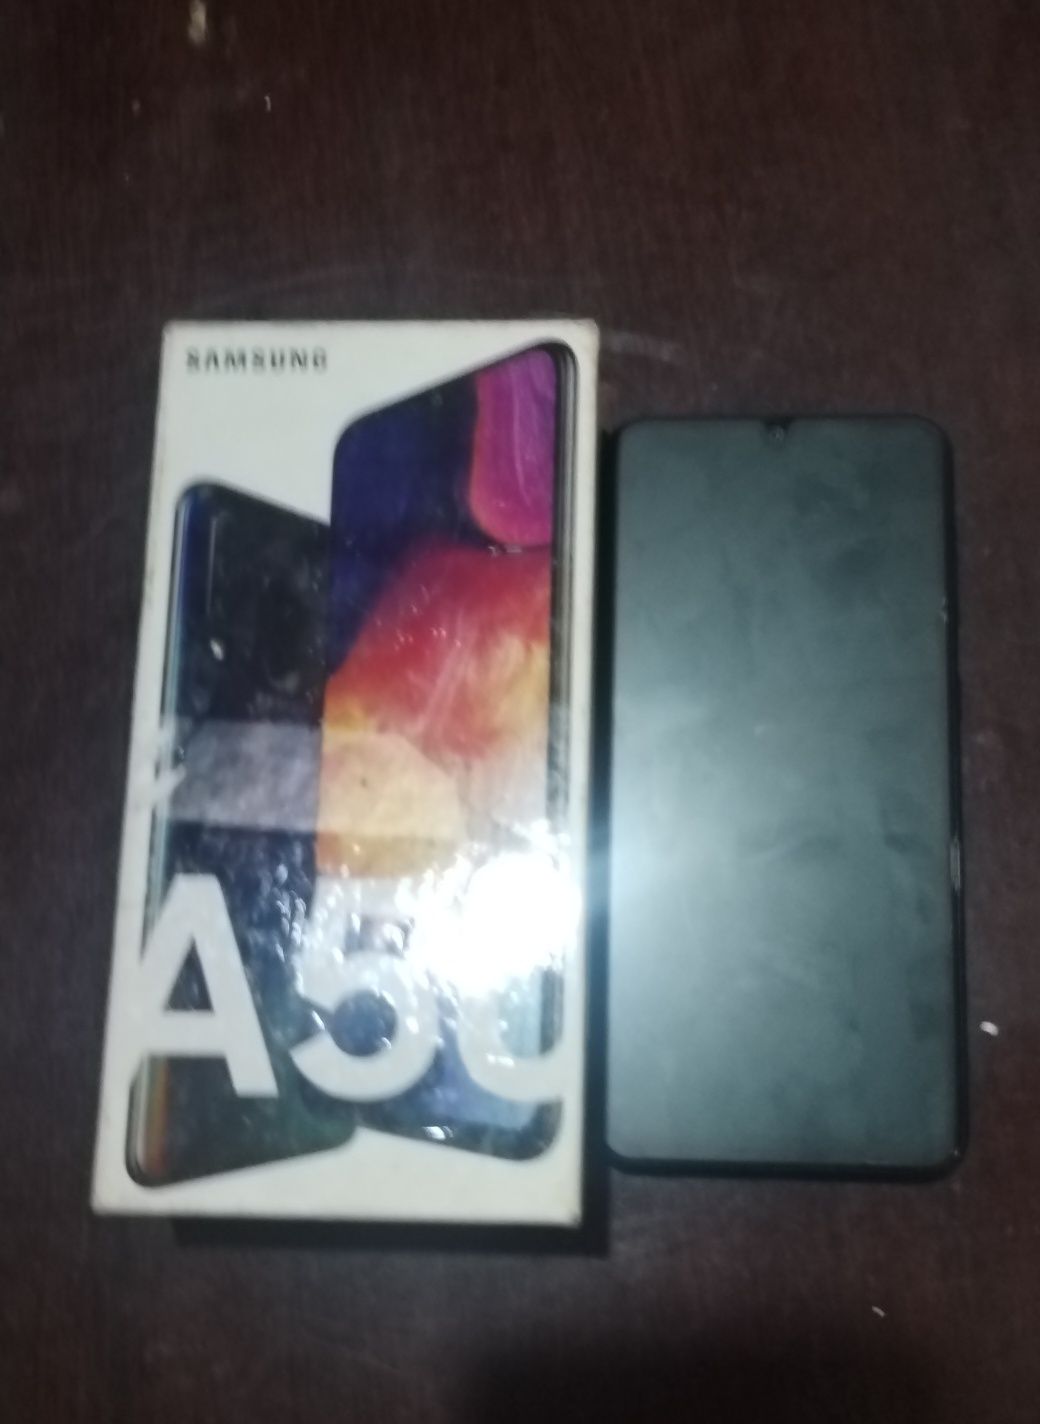 Samsung A50 android